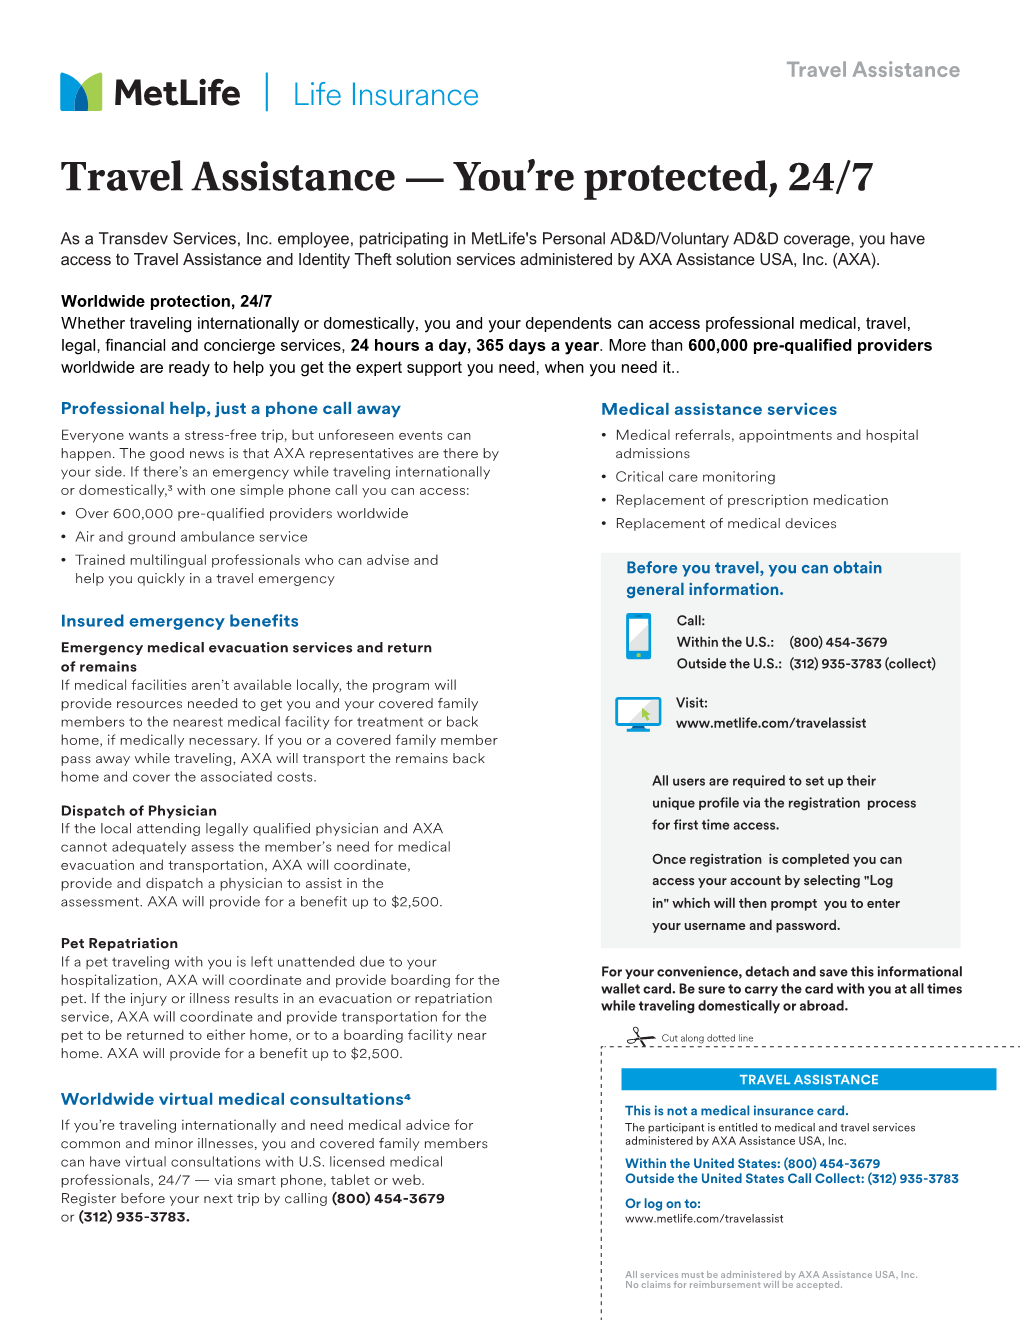 Travel Assistance — You're Protected, 24/7